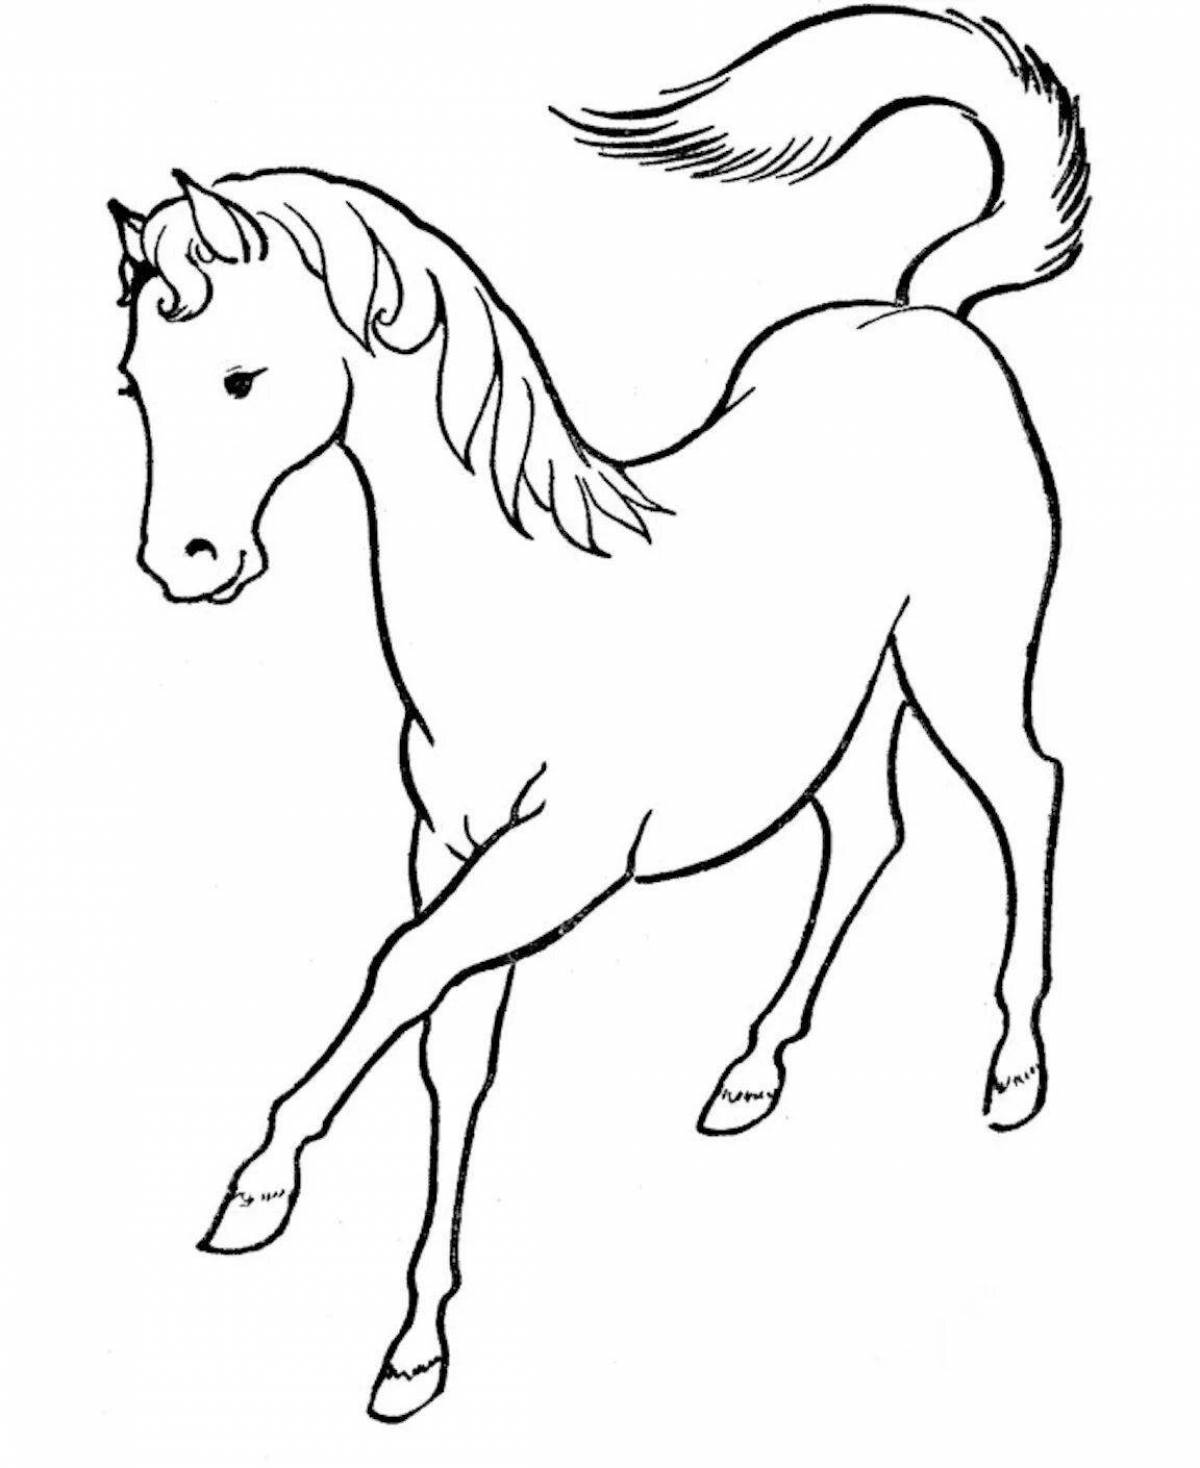 Majestic coloring drawing of a horse